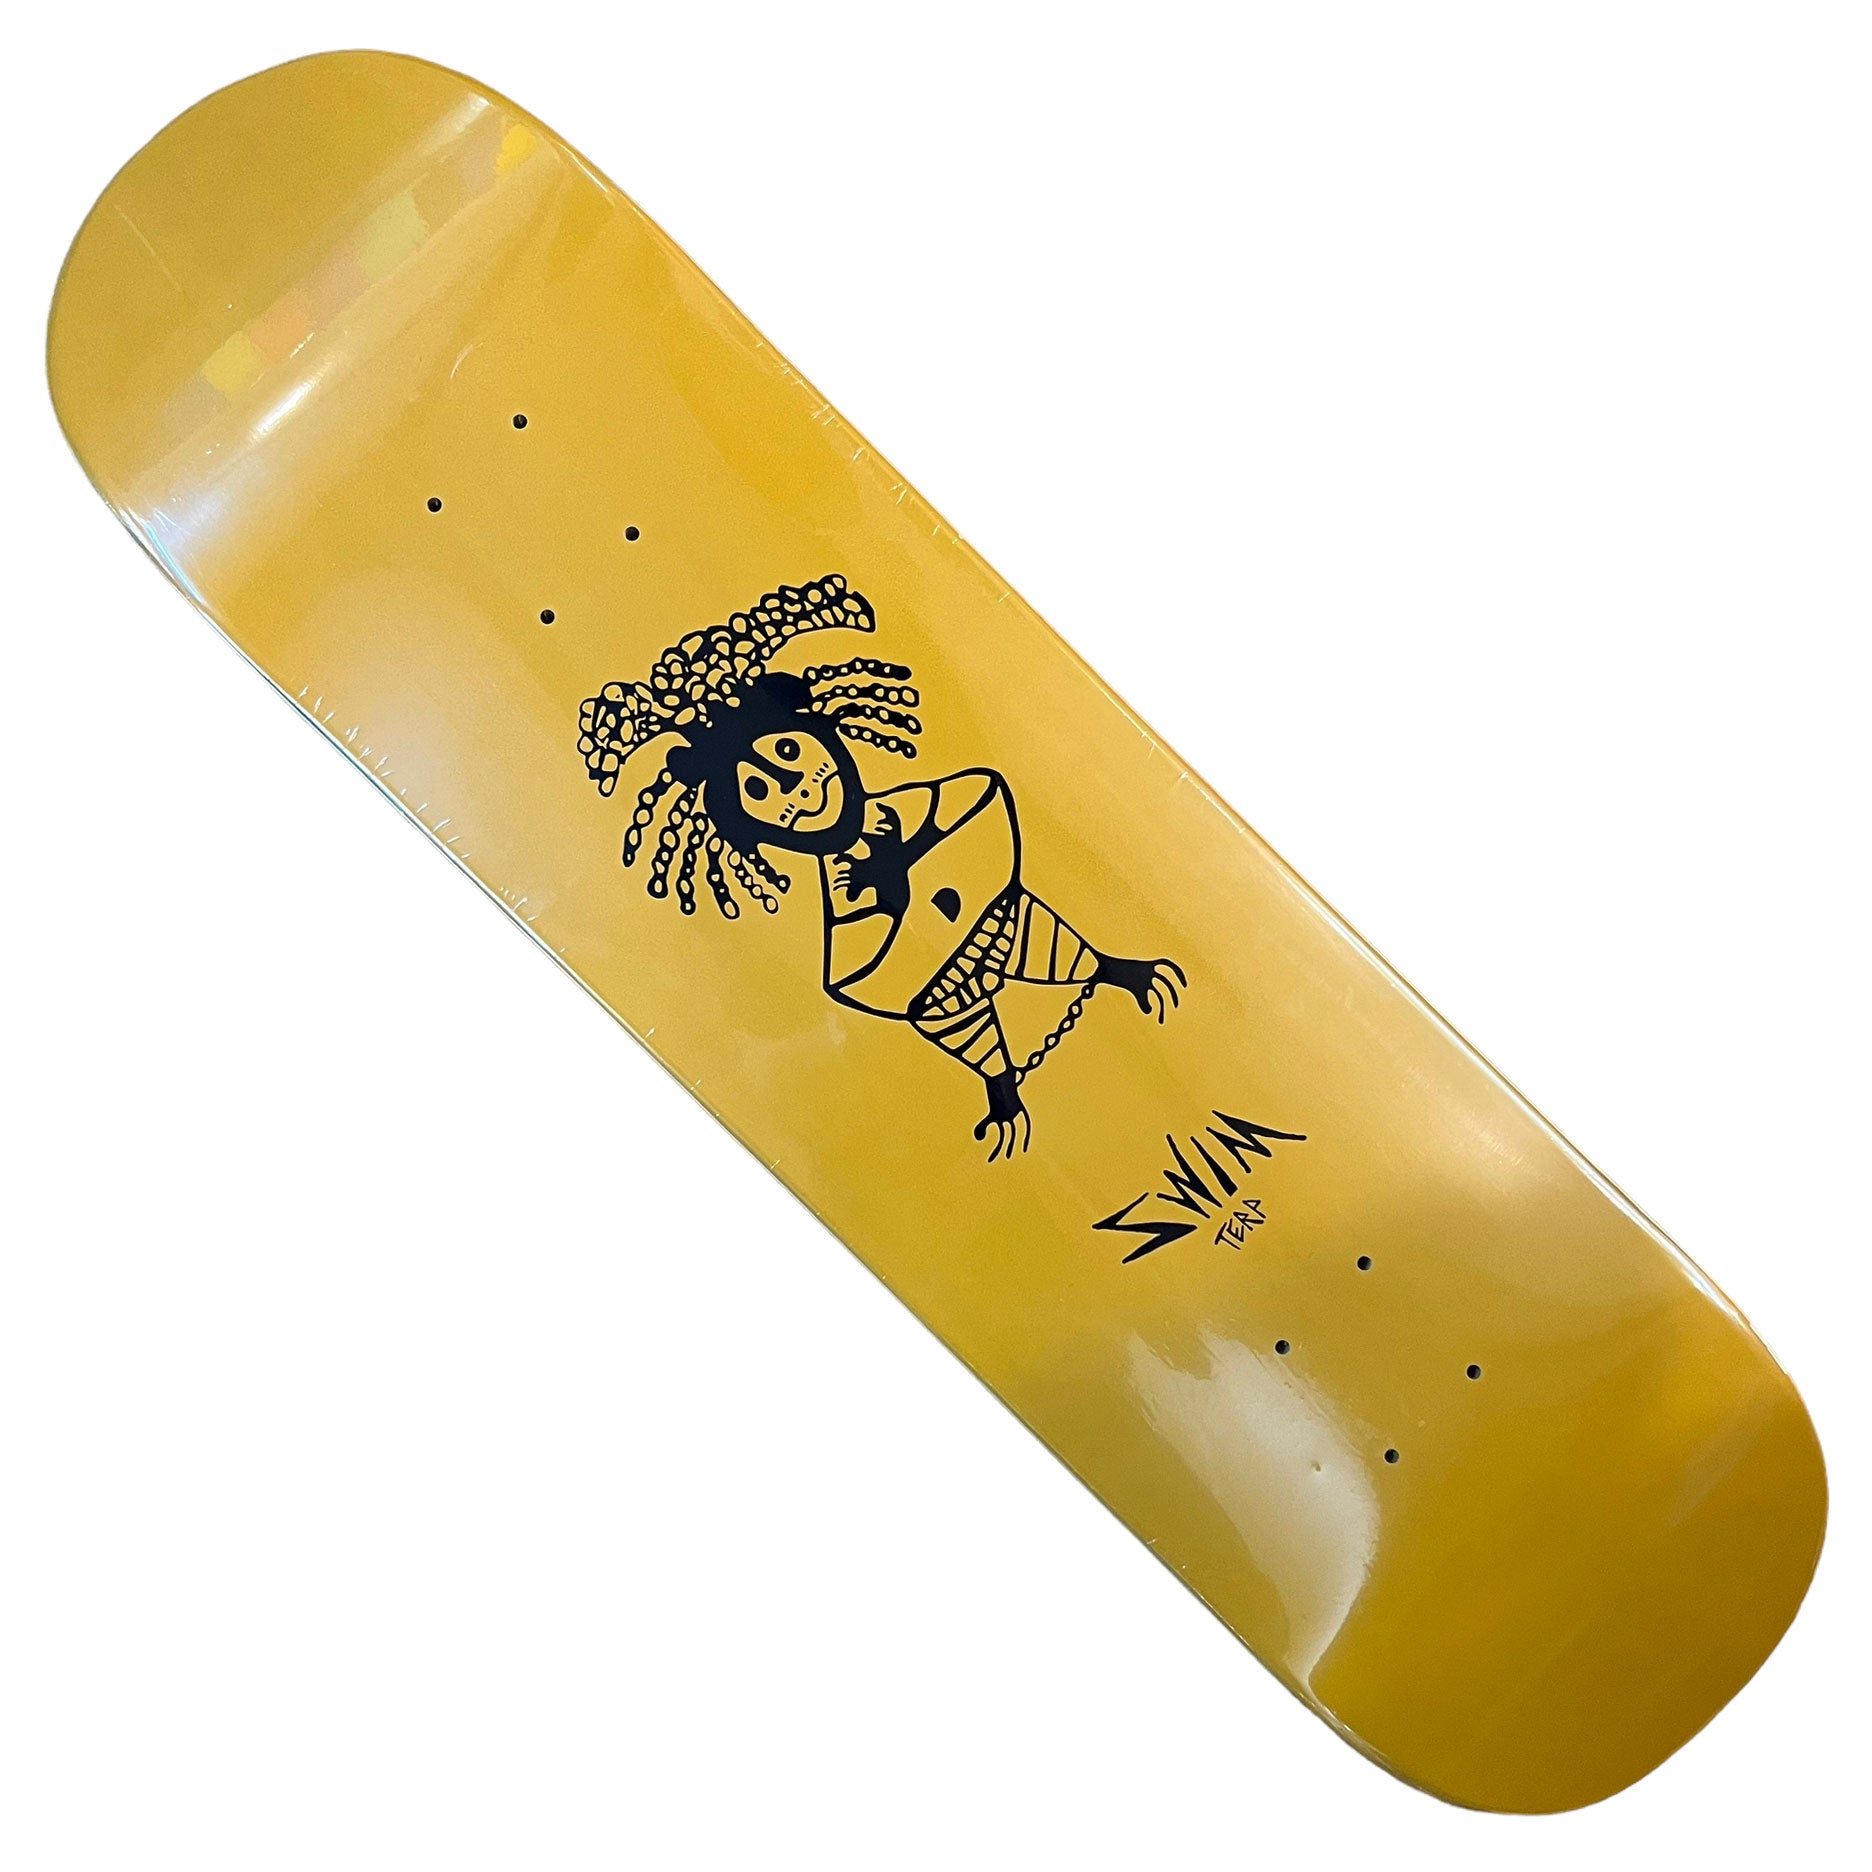 Swim Deck Kevin Terpening Fat Bottom 8.25x32.3 Shaped Square Tail